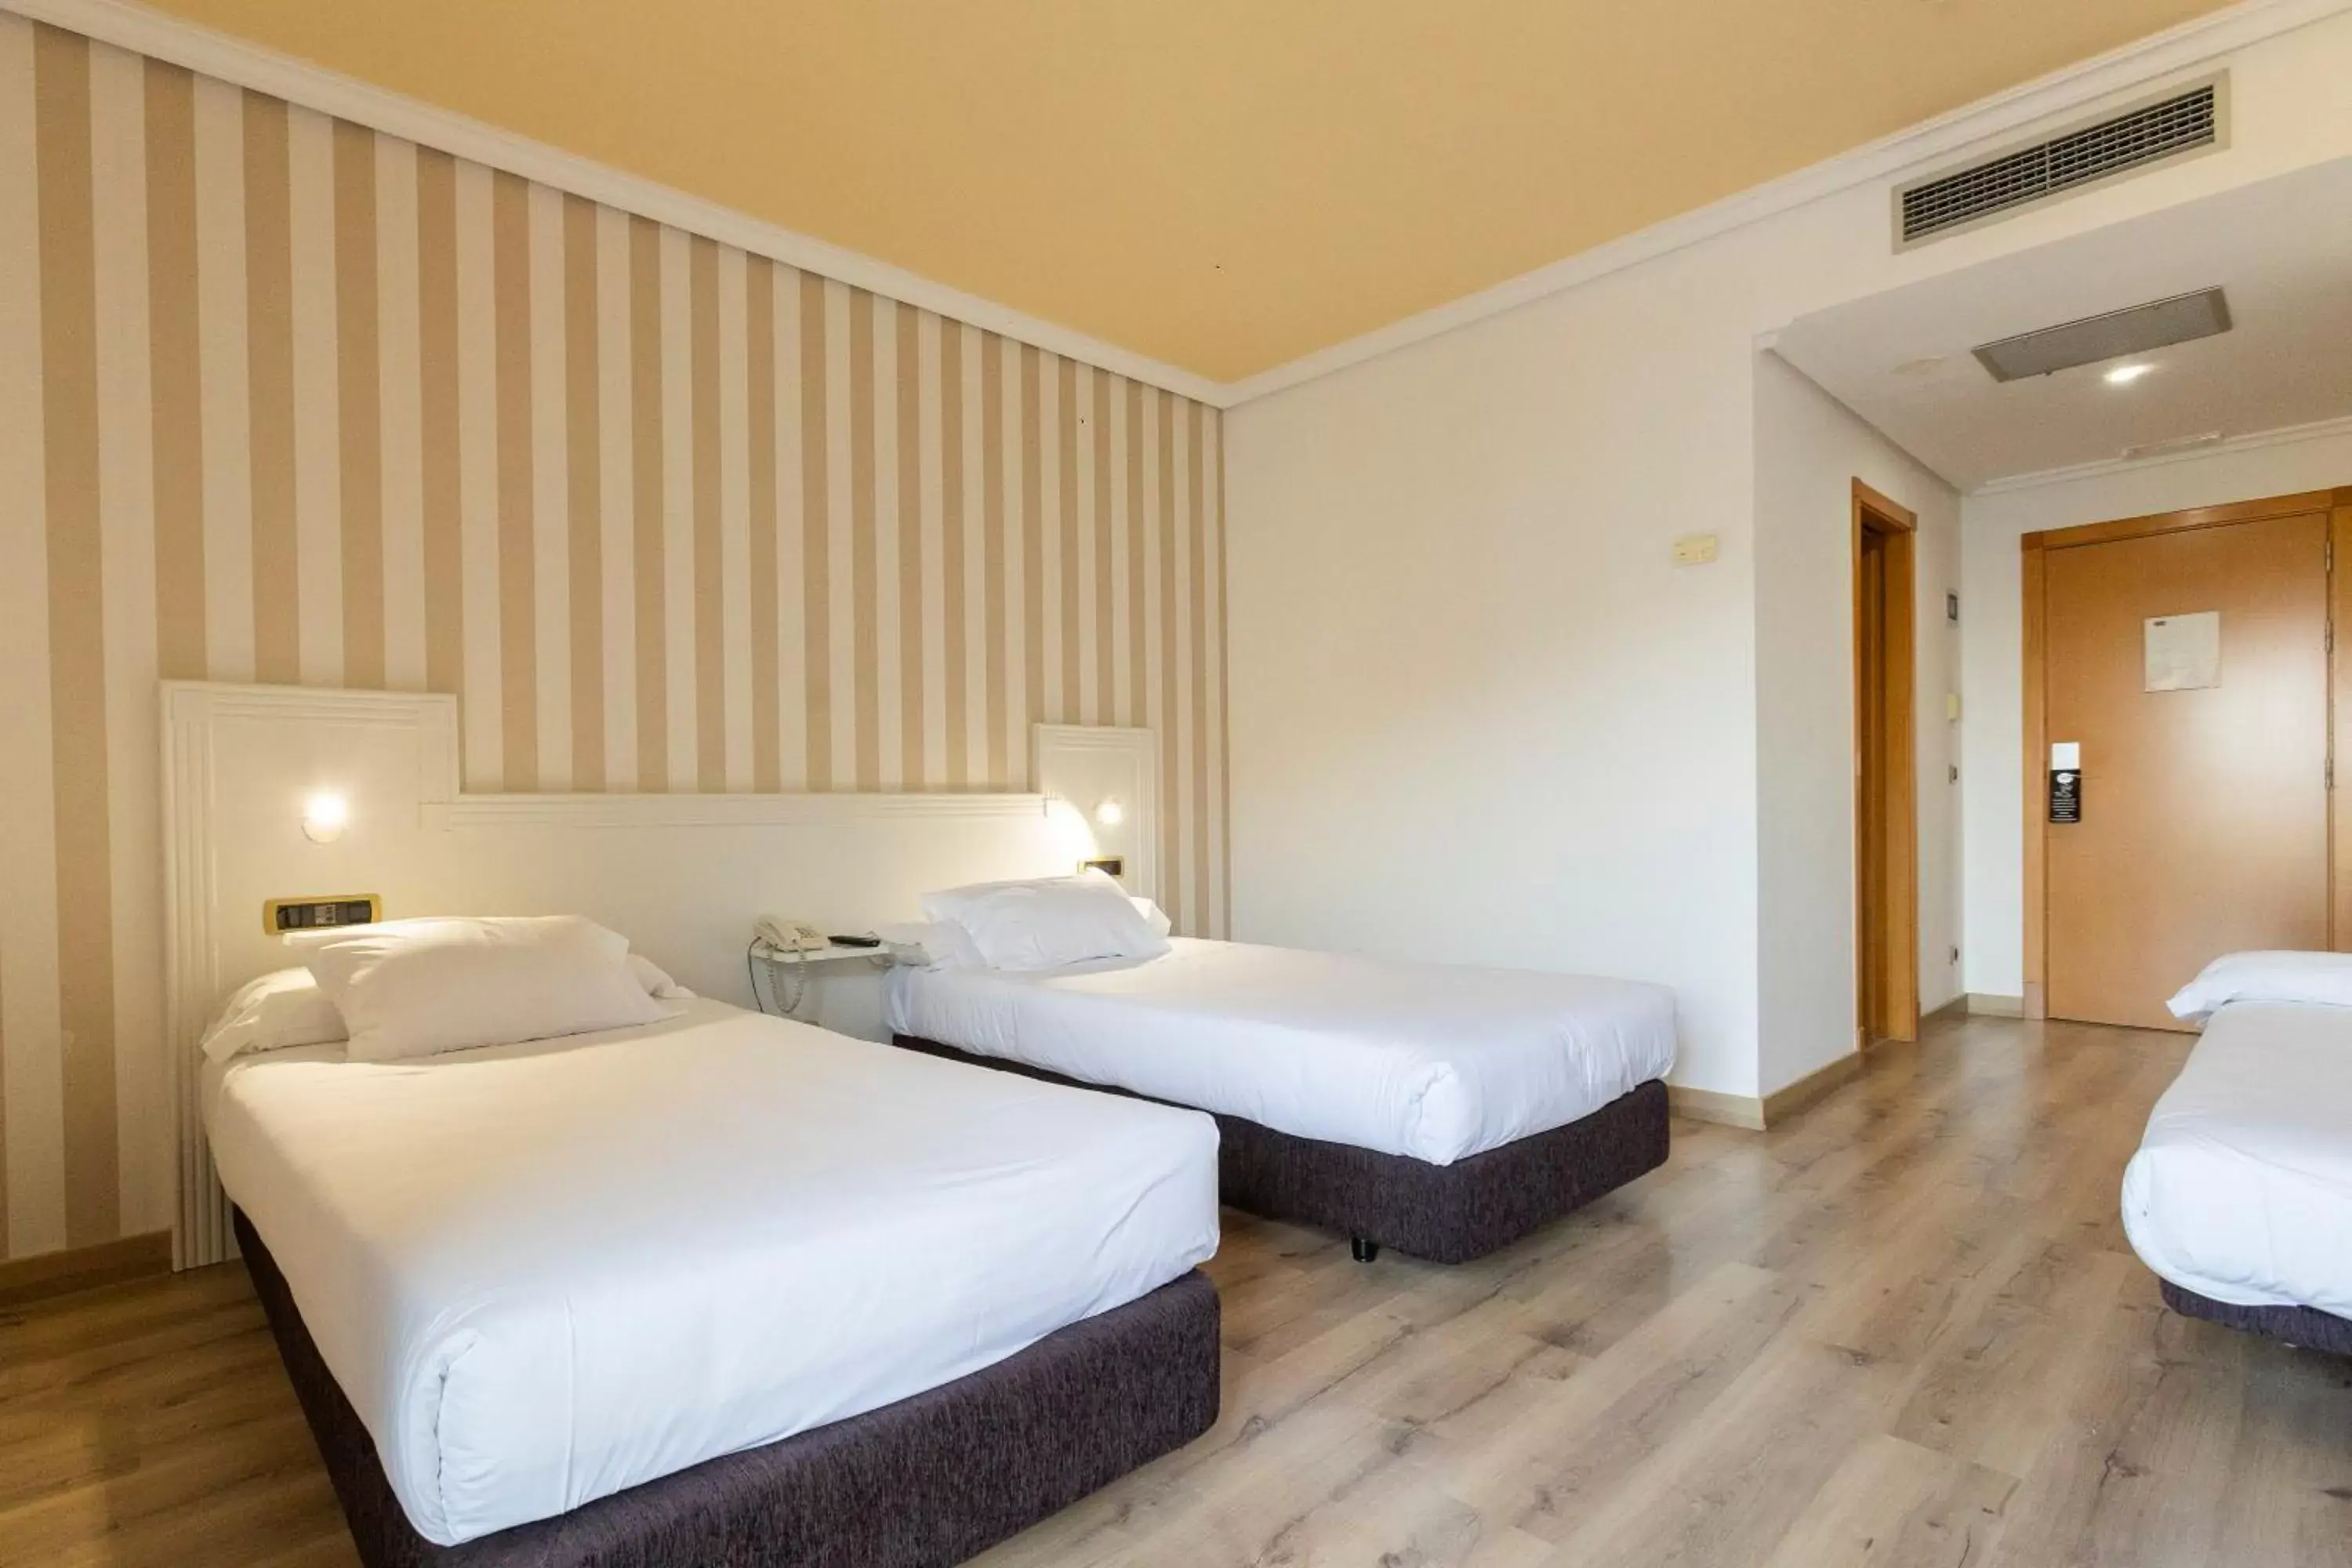 Triple Room in Hotel Alfonso I